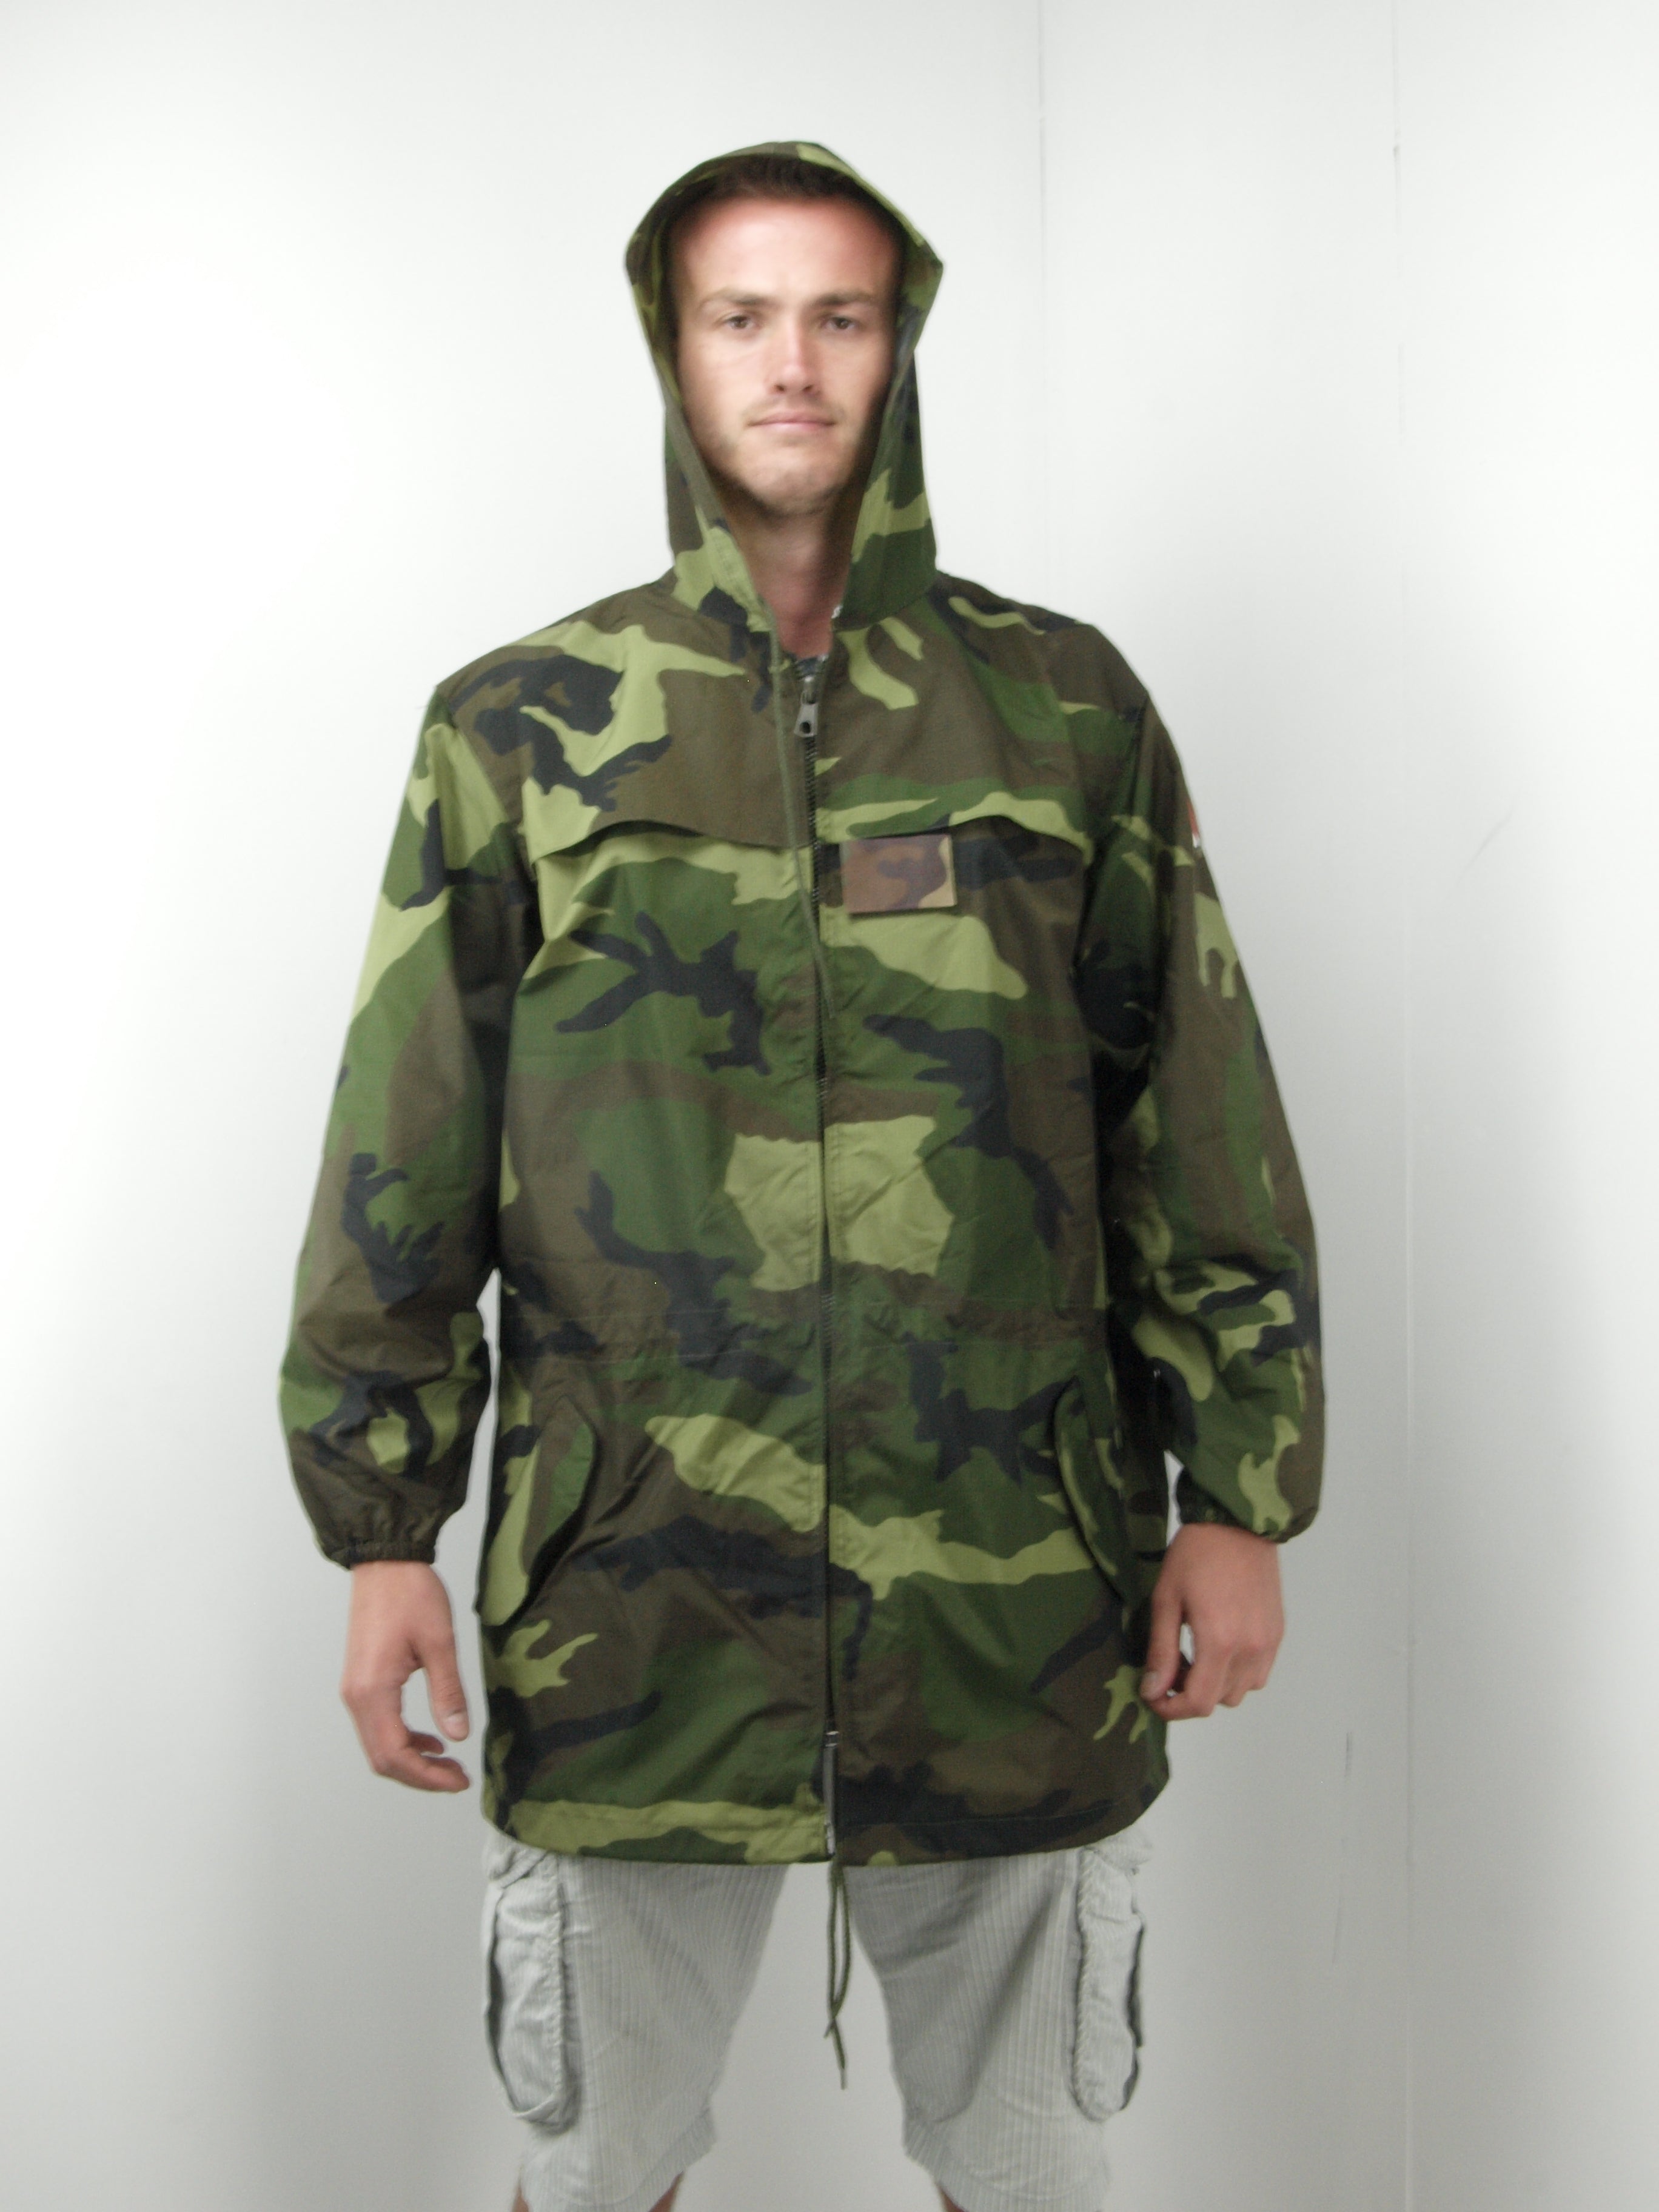 Military and Army Jackets, Parkas and Smocks - UK Page 2 - Forces ...